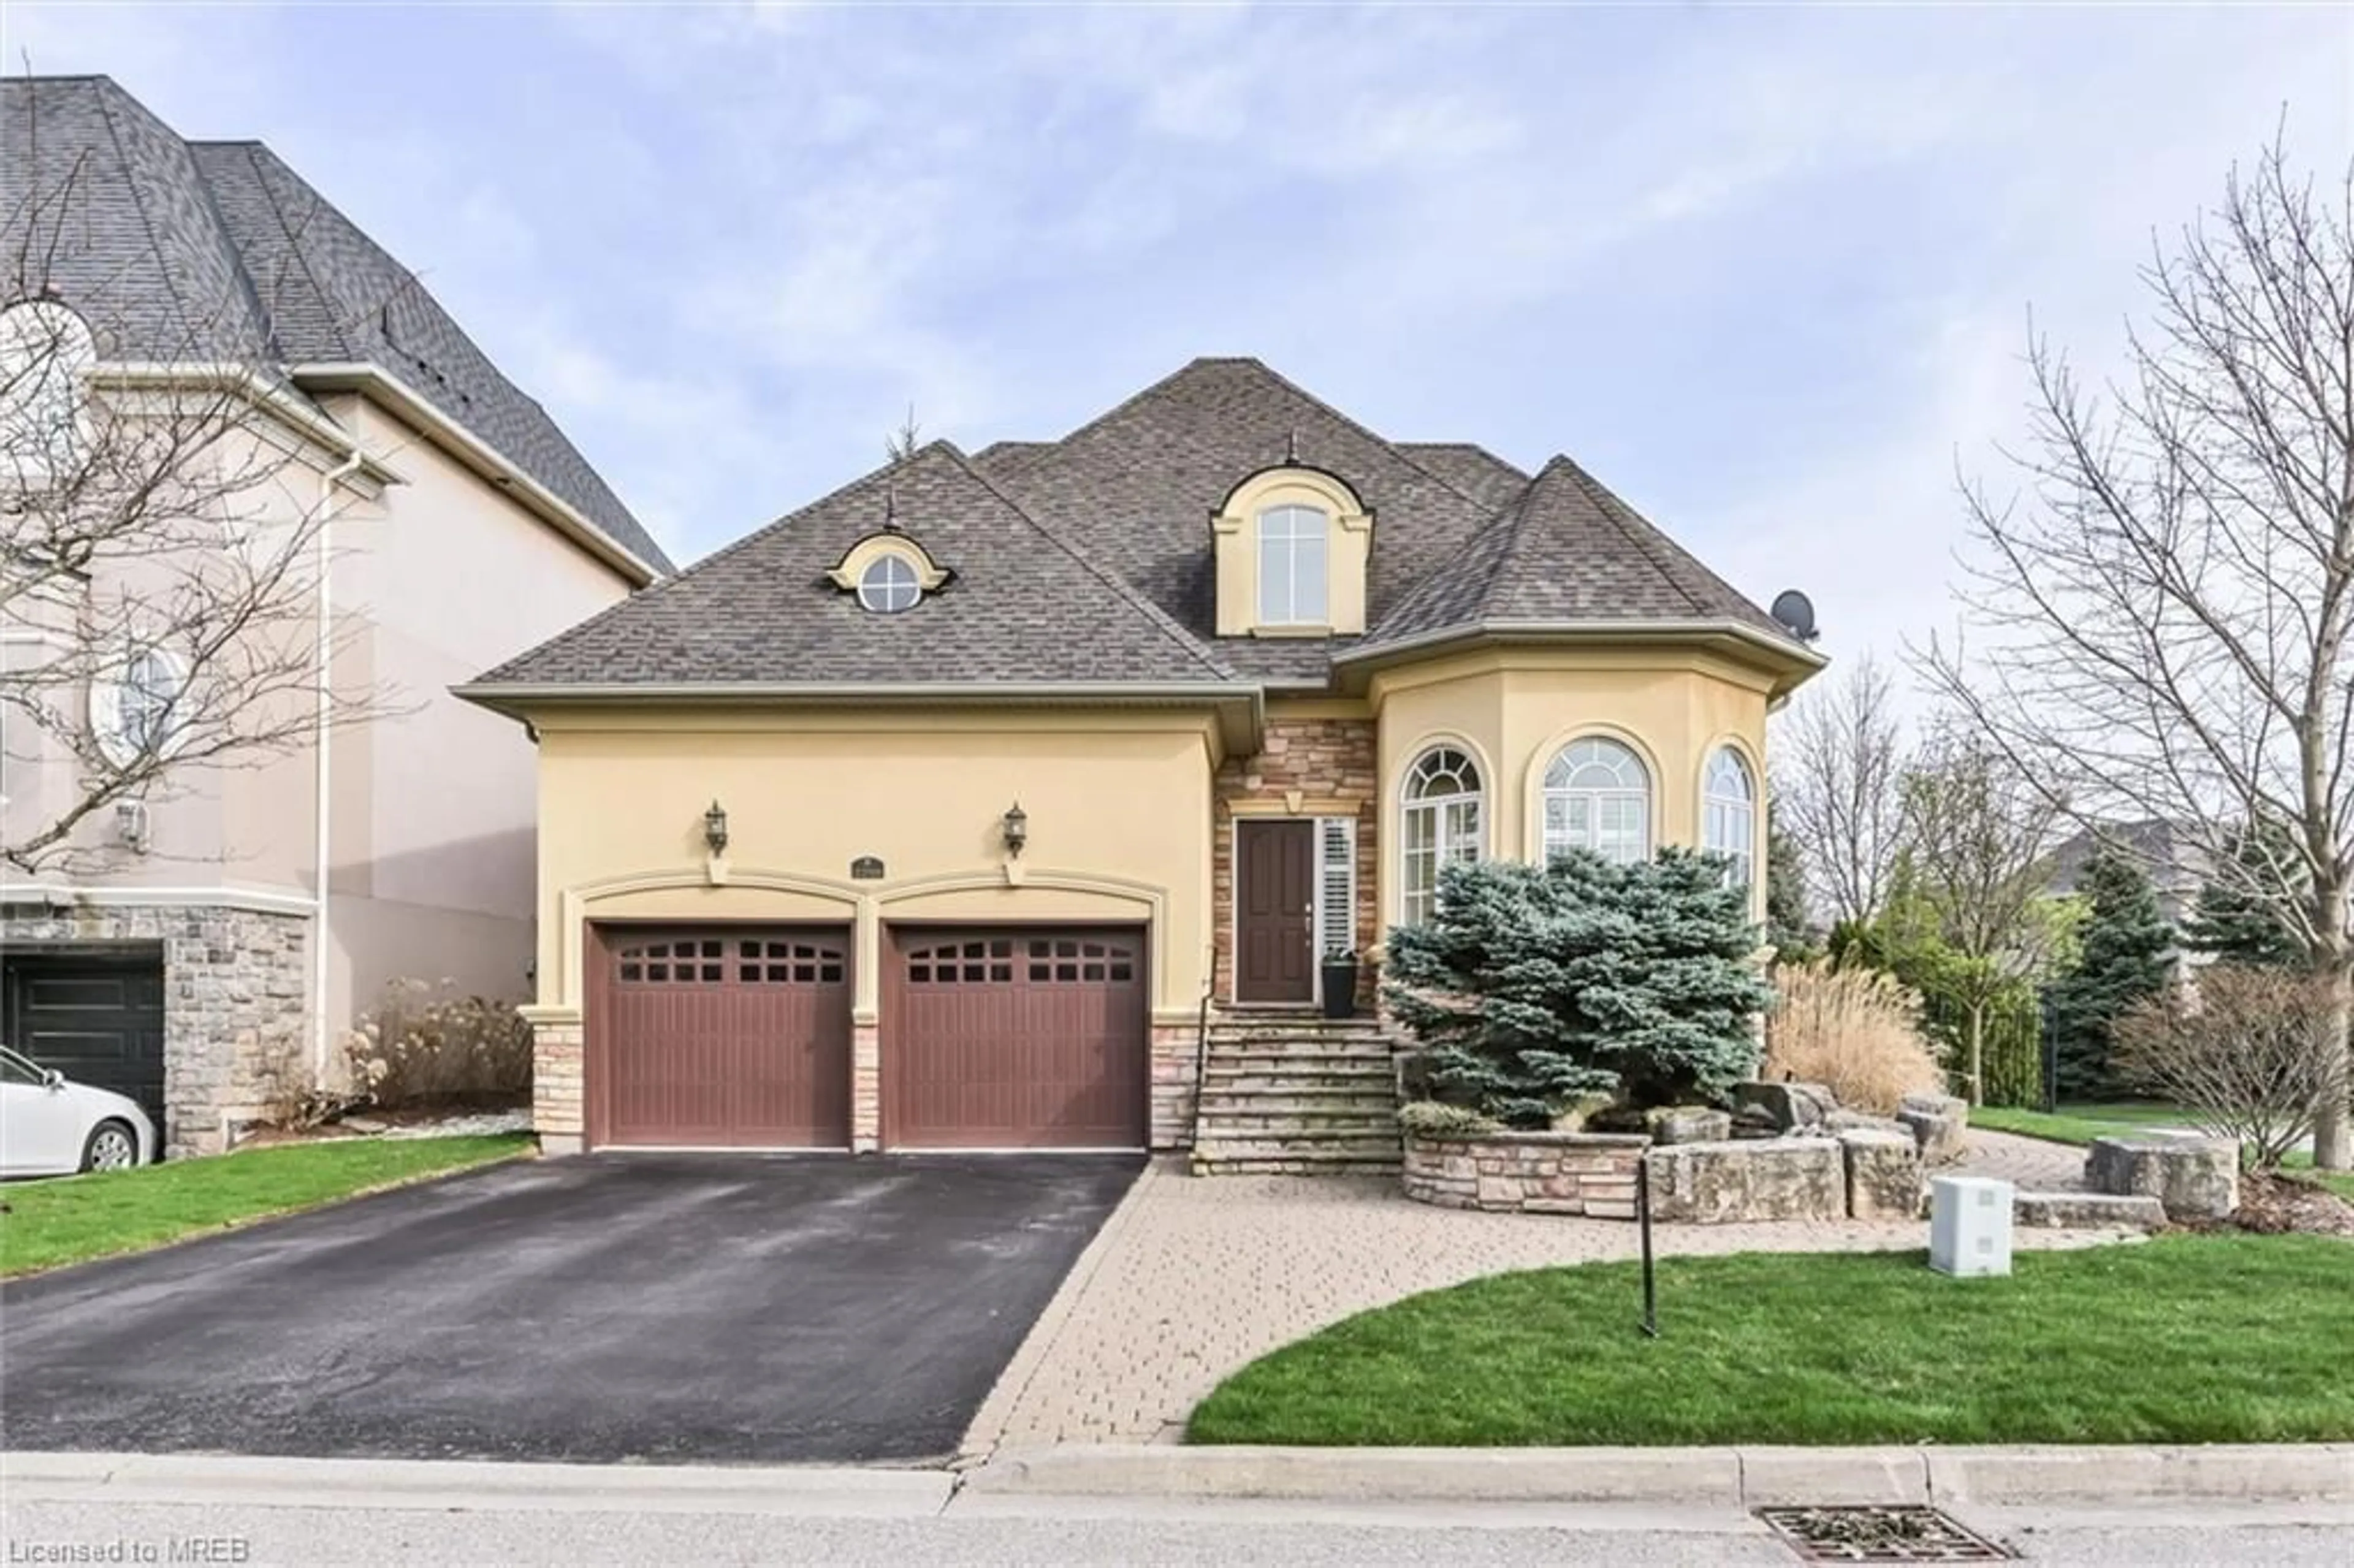 Frontside or backside of a home for 2258 Providence Rd, Oakville Ontario L6H 6X9